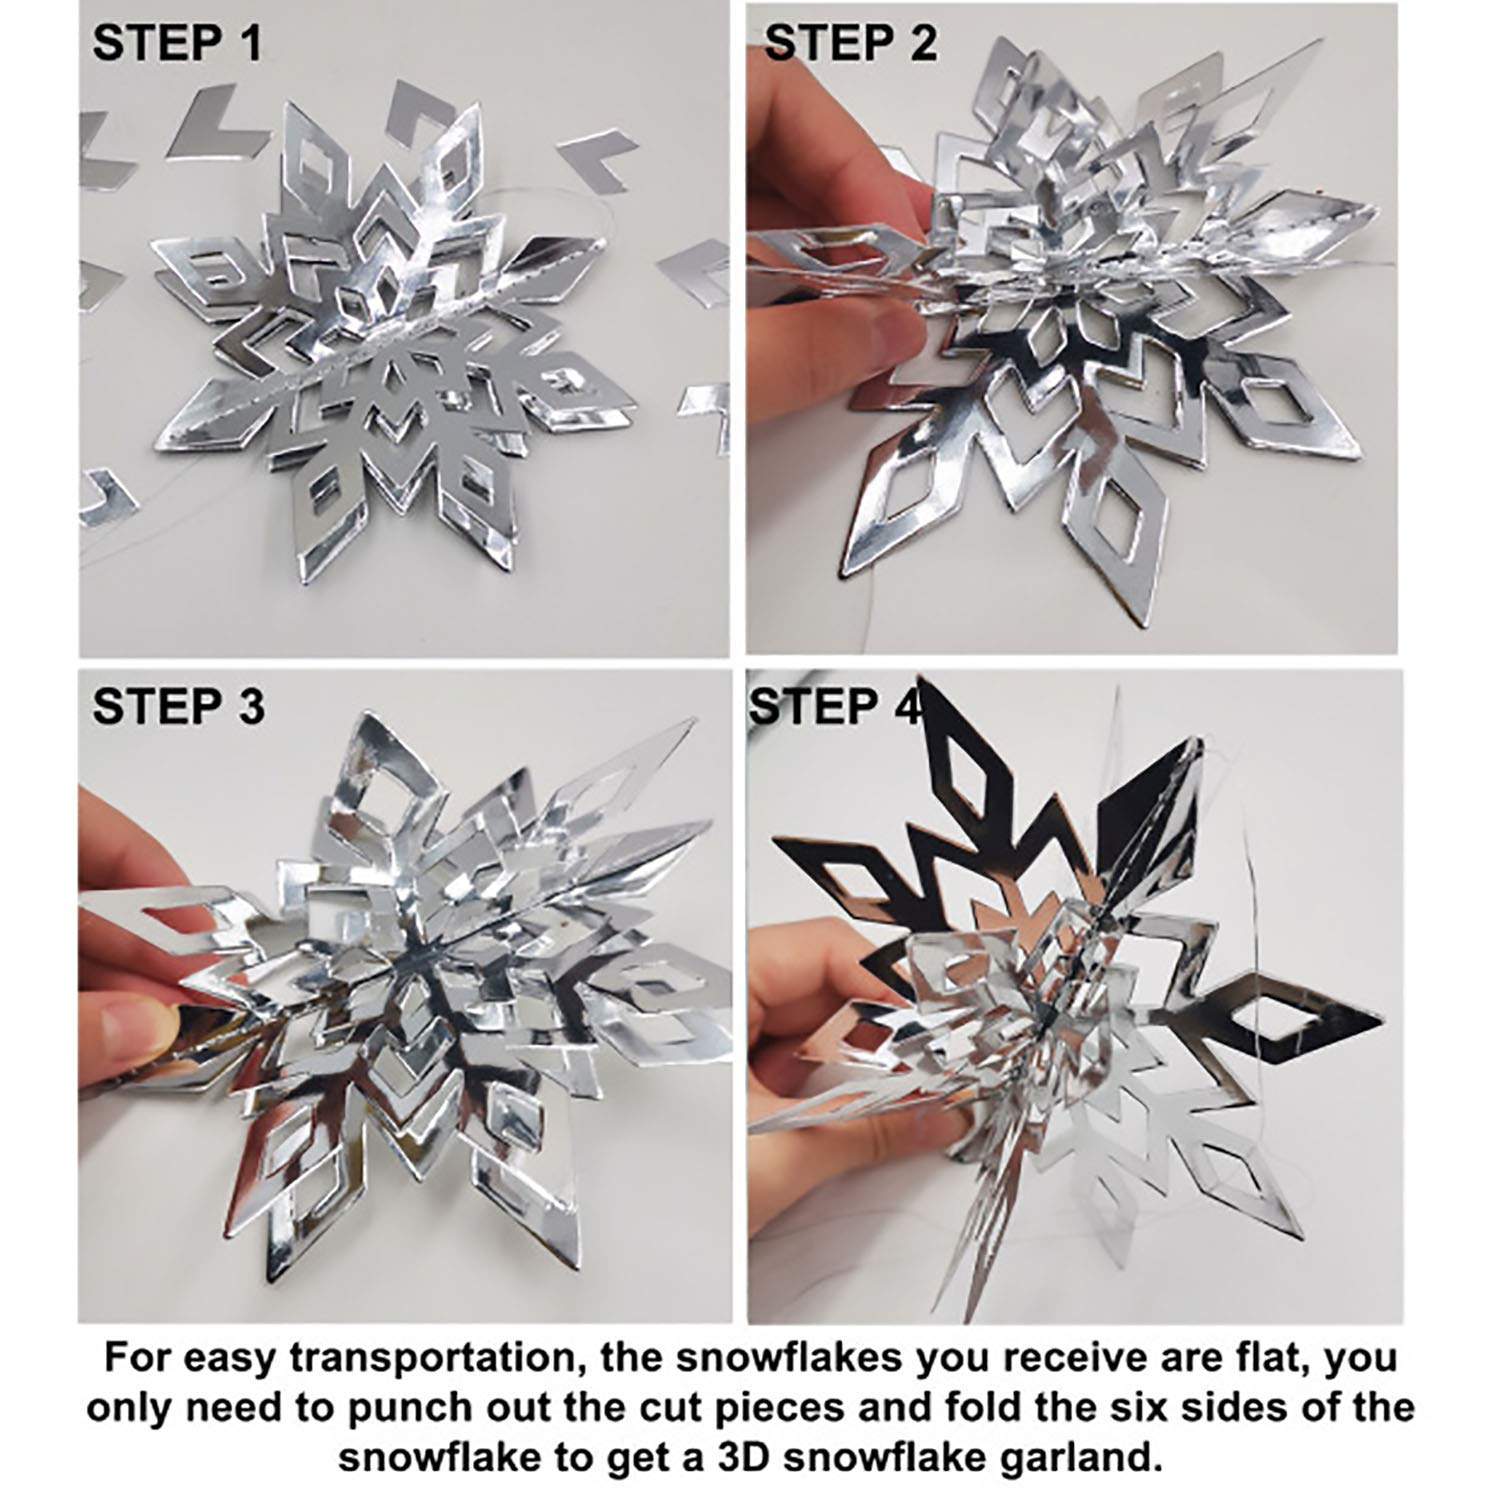 Winter Christmas Hanging Snowflake Decorations, 12PCS 3D Large Silver Snowflakes & 12PCS White Paper Snowflakes Hanging Garland for Christmas Winter Wonderland Holiday New Year Party Home Decoration